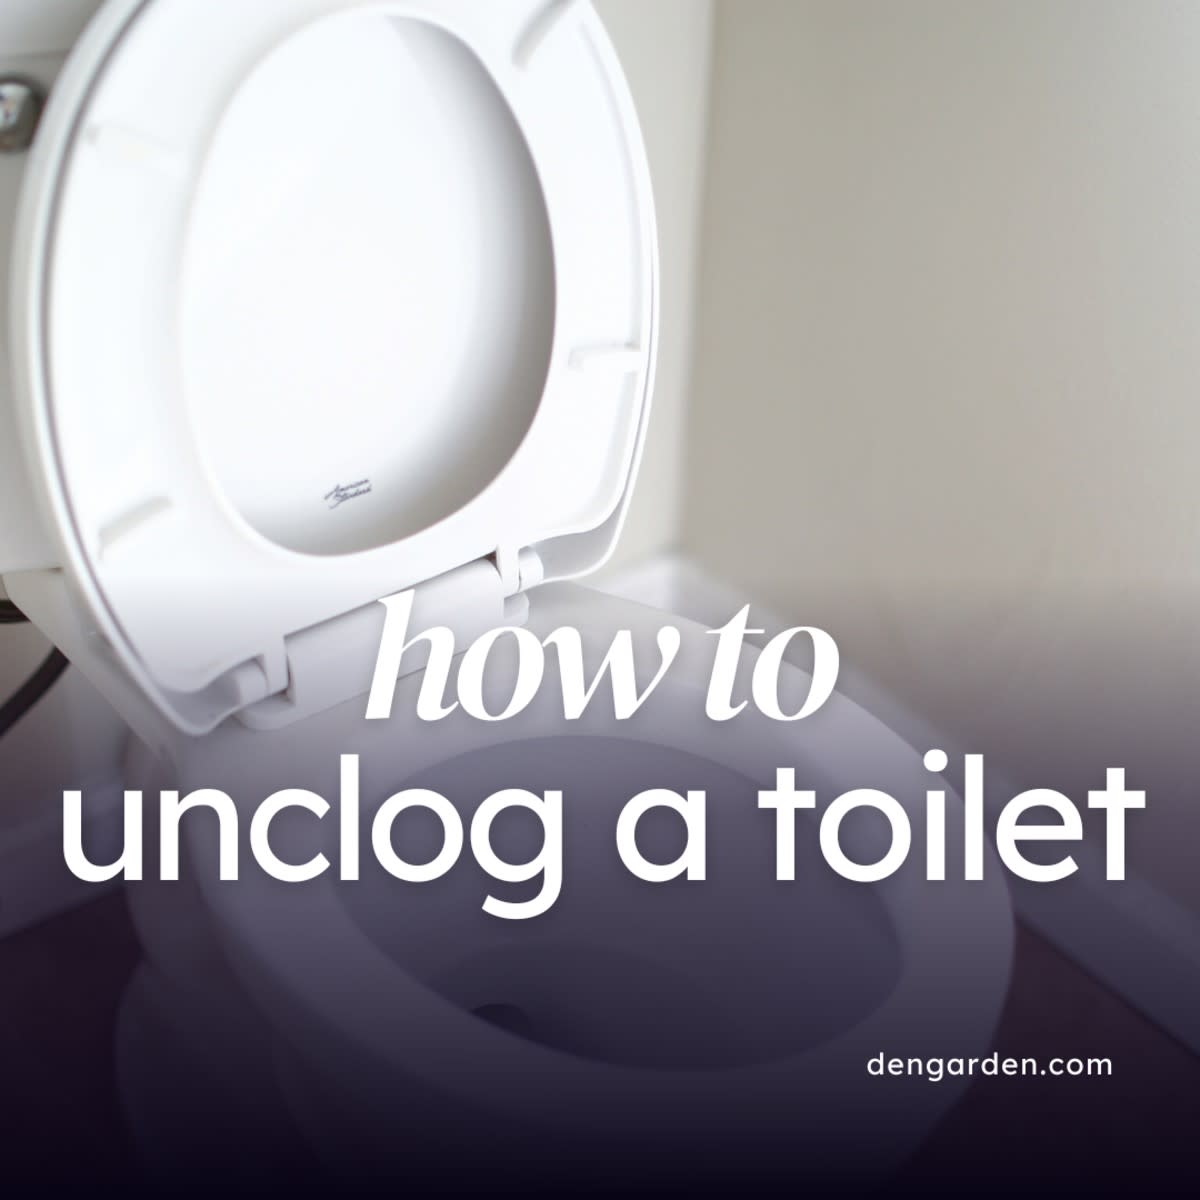 https://images.saymedia-content.com/.image/t_share/MjAxNjM0MDY1NDg3NTA1MDM5/how-to-unclog-a-toilet-methods.jpg